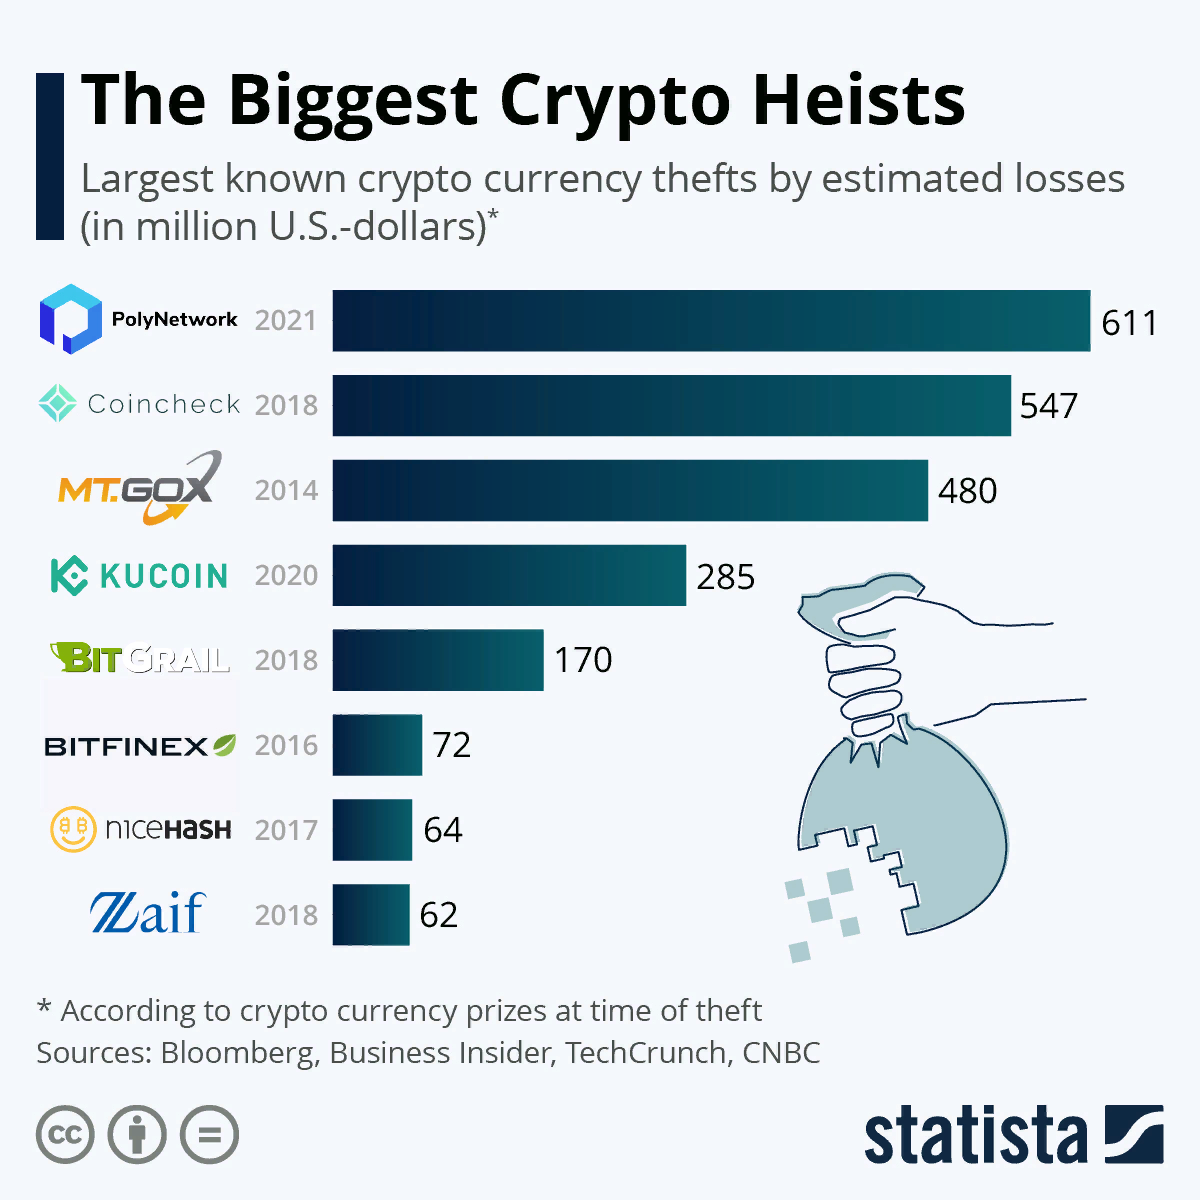 The biggest crypto heists in history